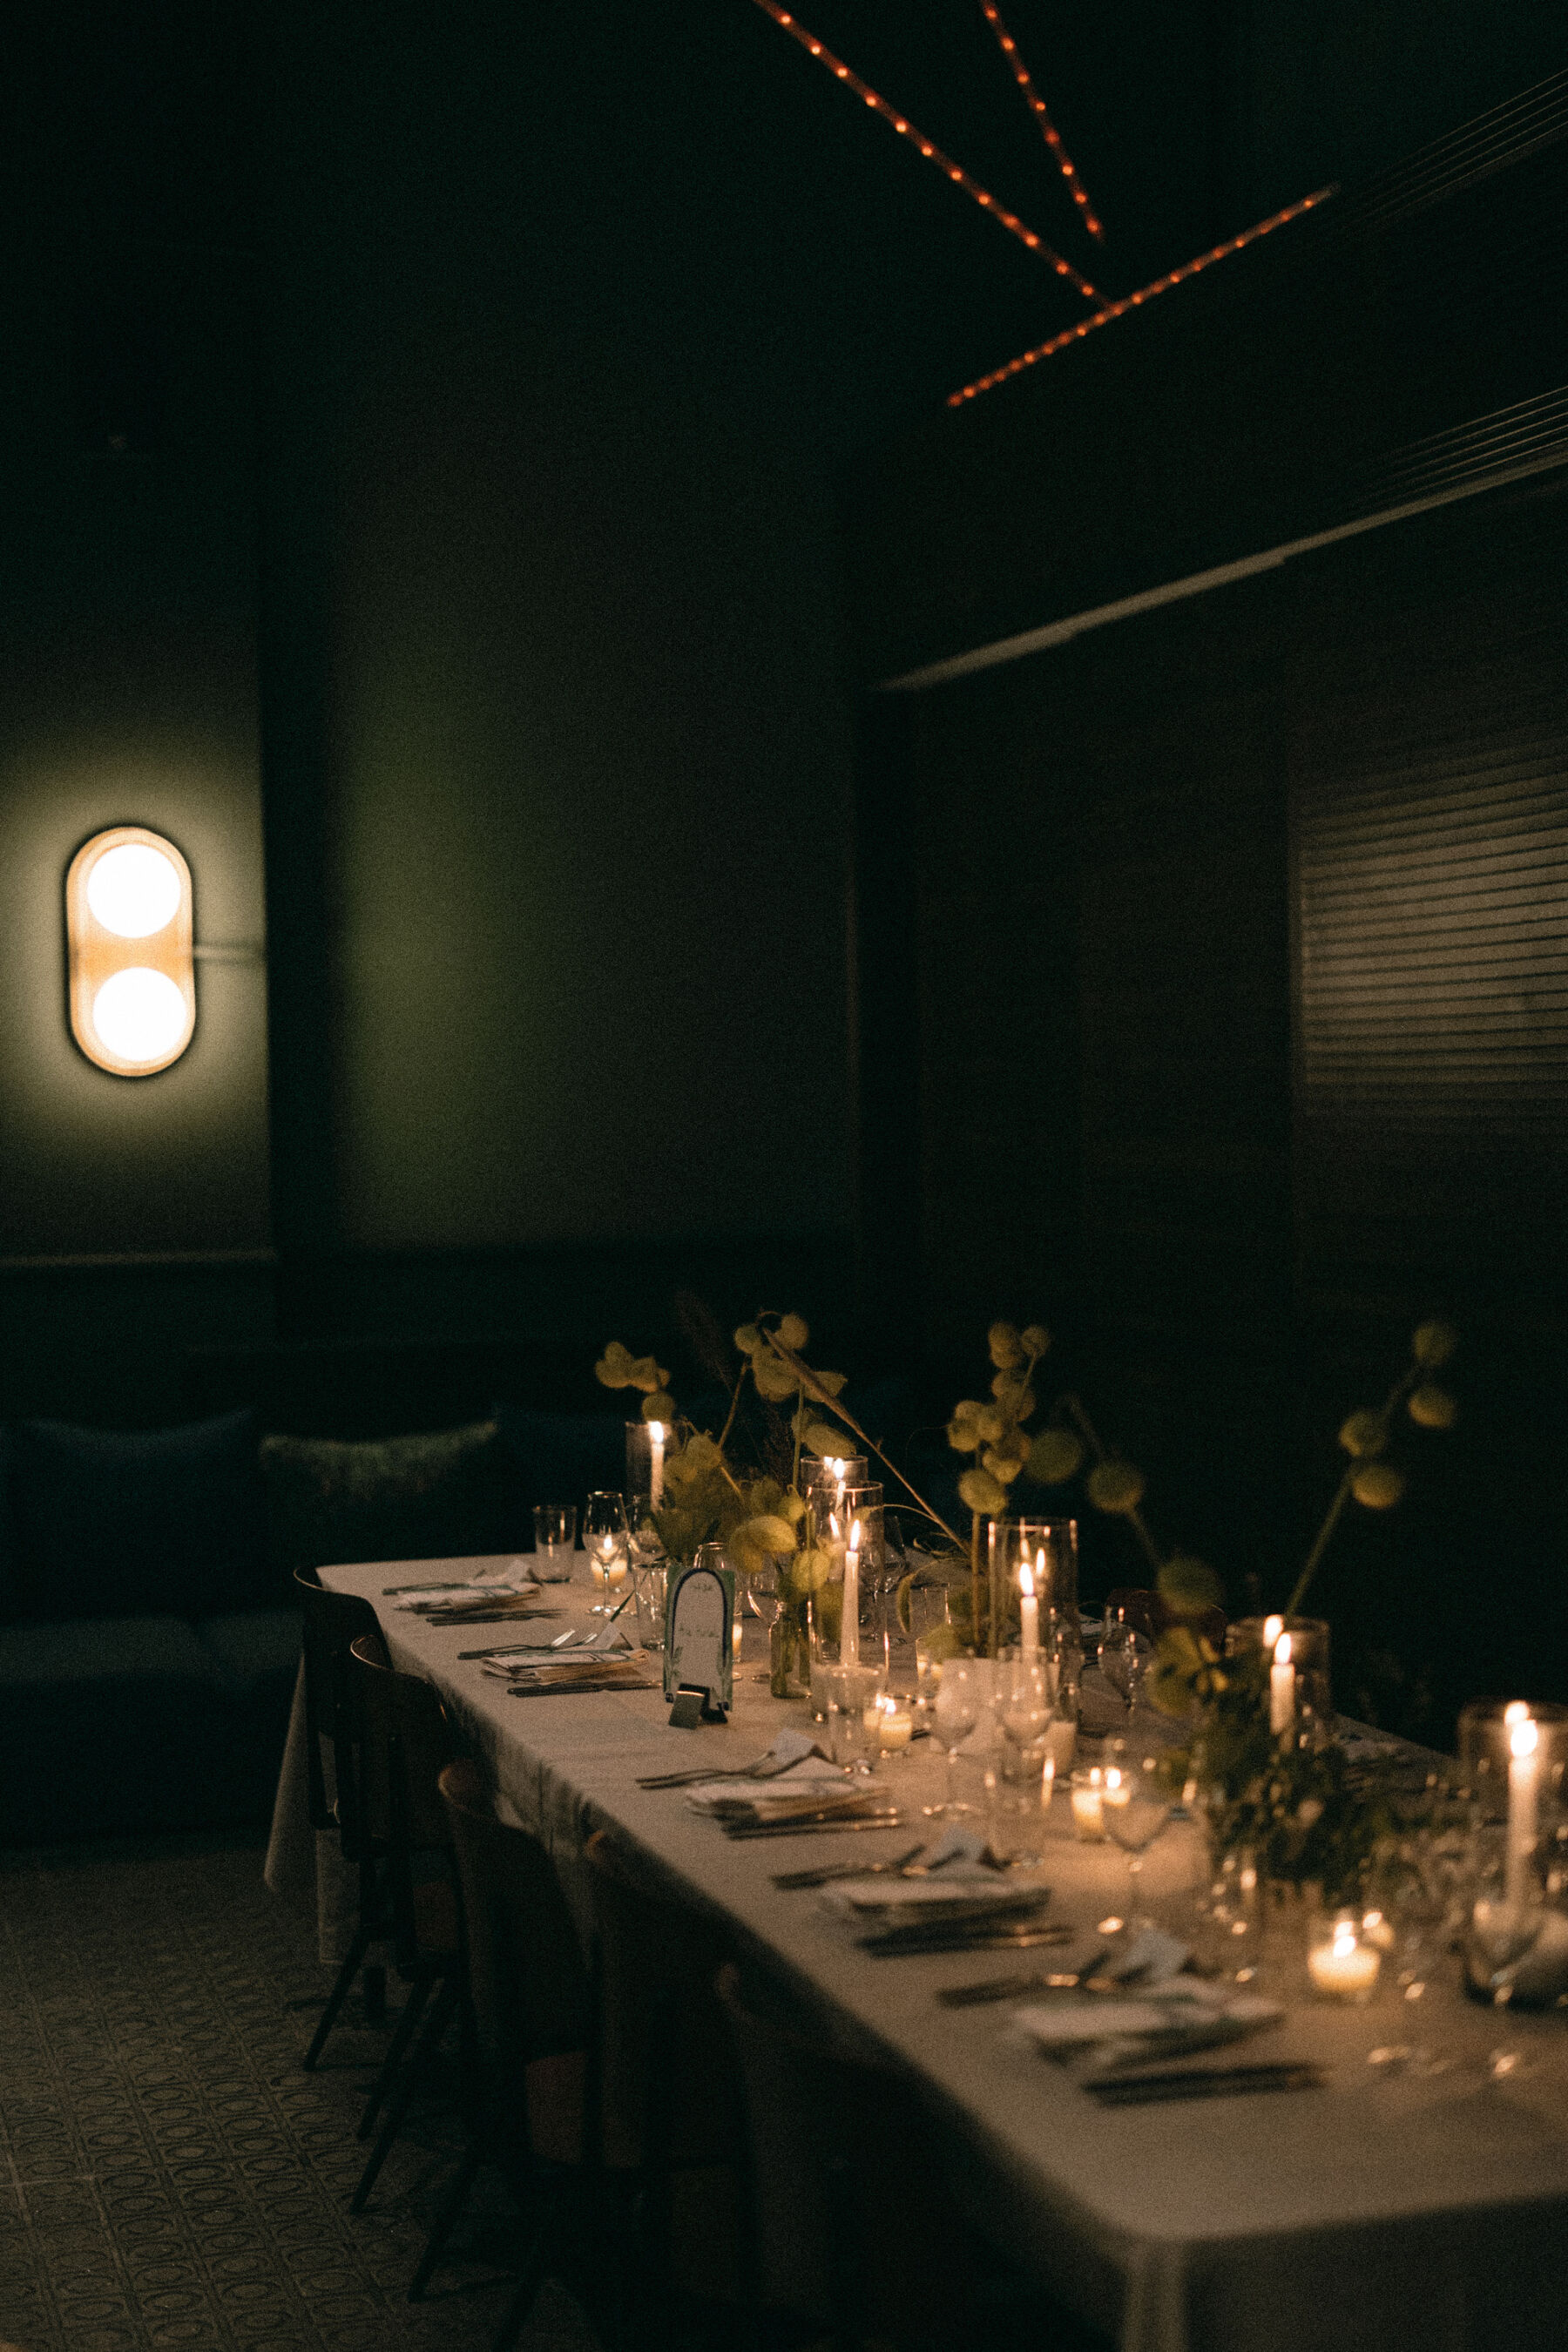 Romantic candle lit wedding reception setting. Rebecca Rees Photography.